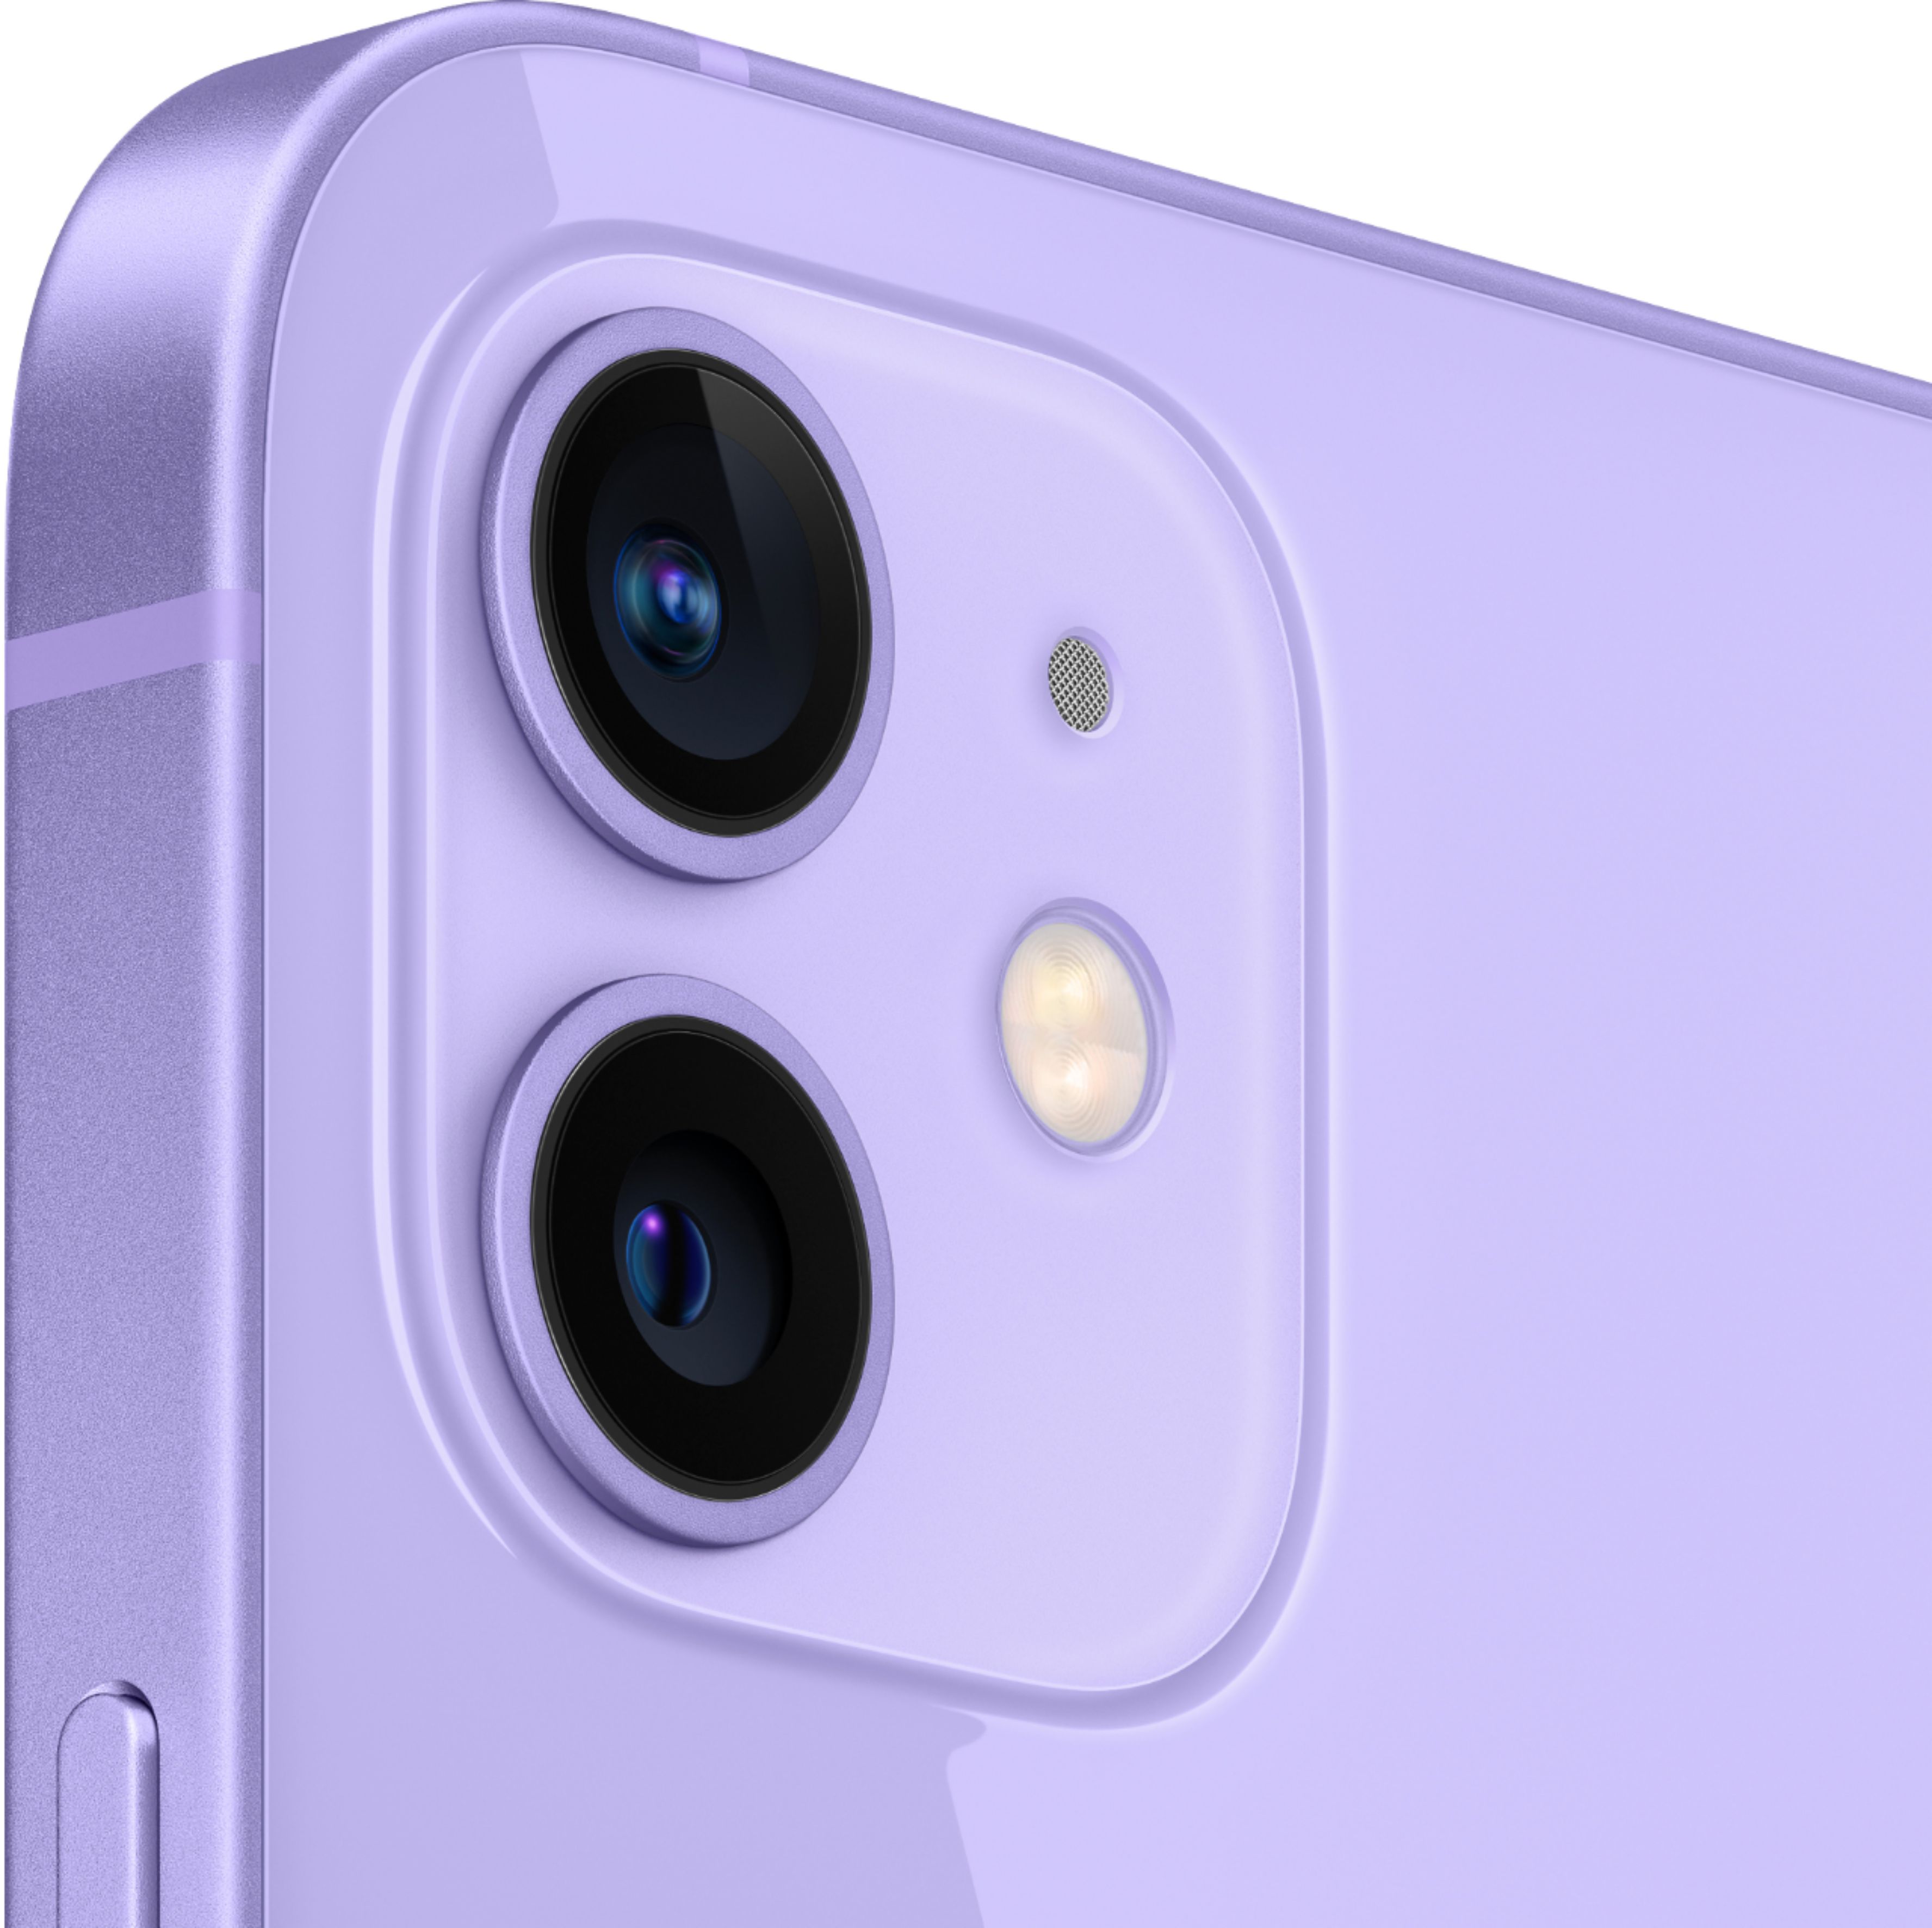 Check out Apple's new purple finish for the iPhone 12 and iPhone